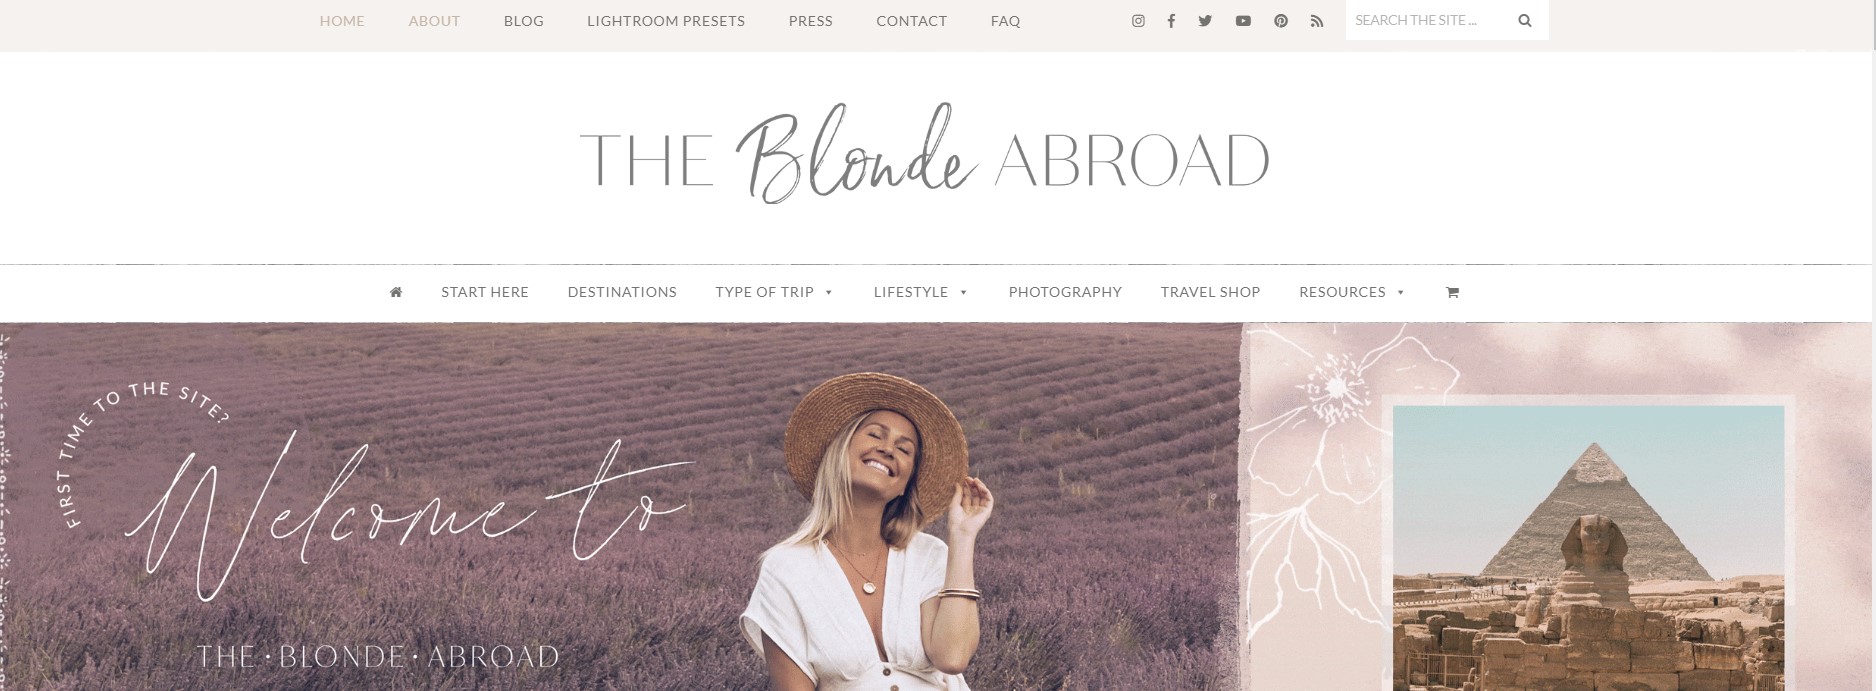 the-blonde-abroad-travel-and-jet-set-lifestyle-blog